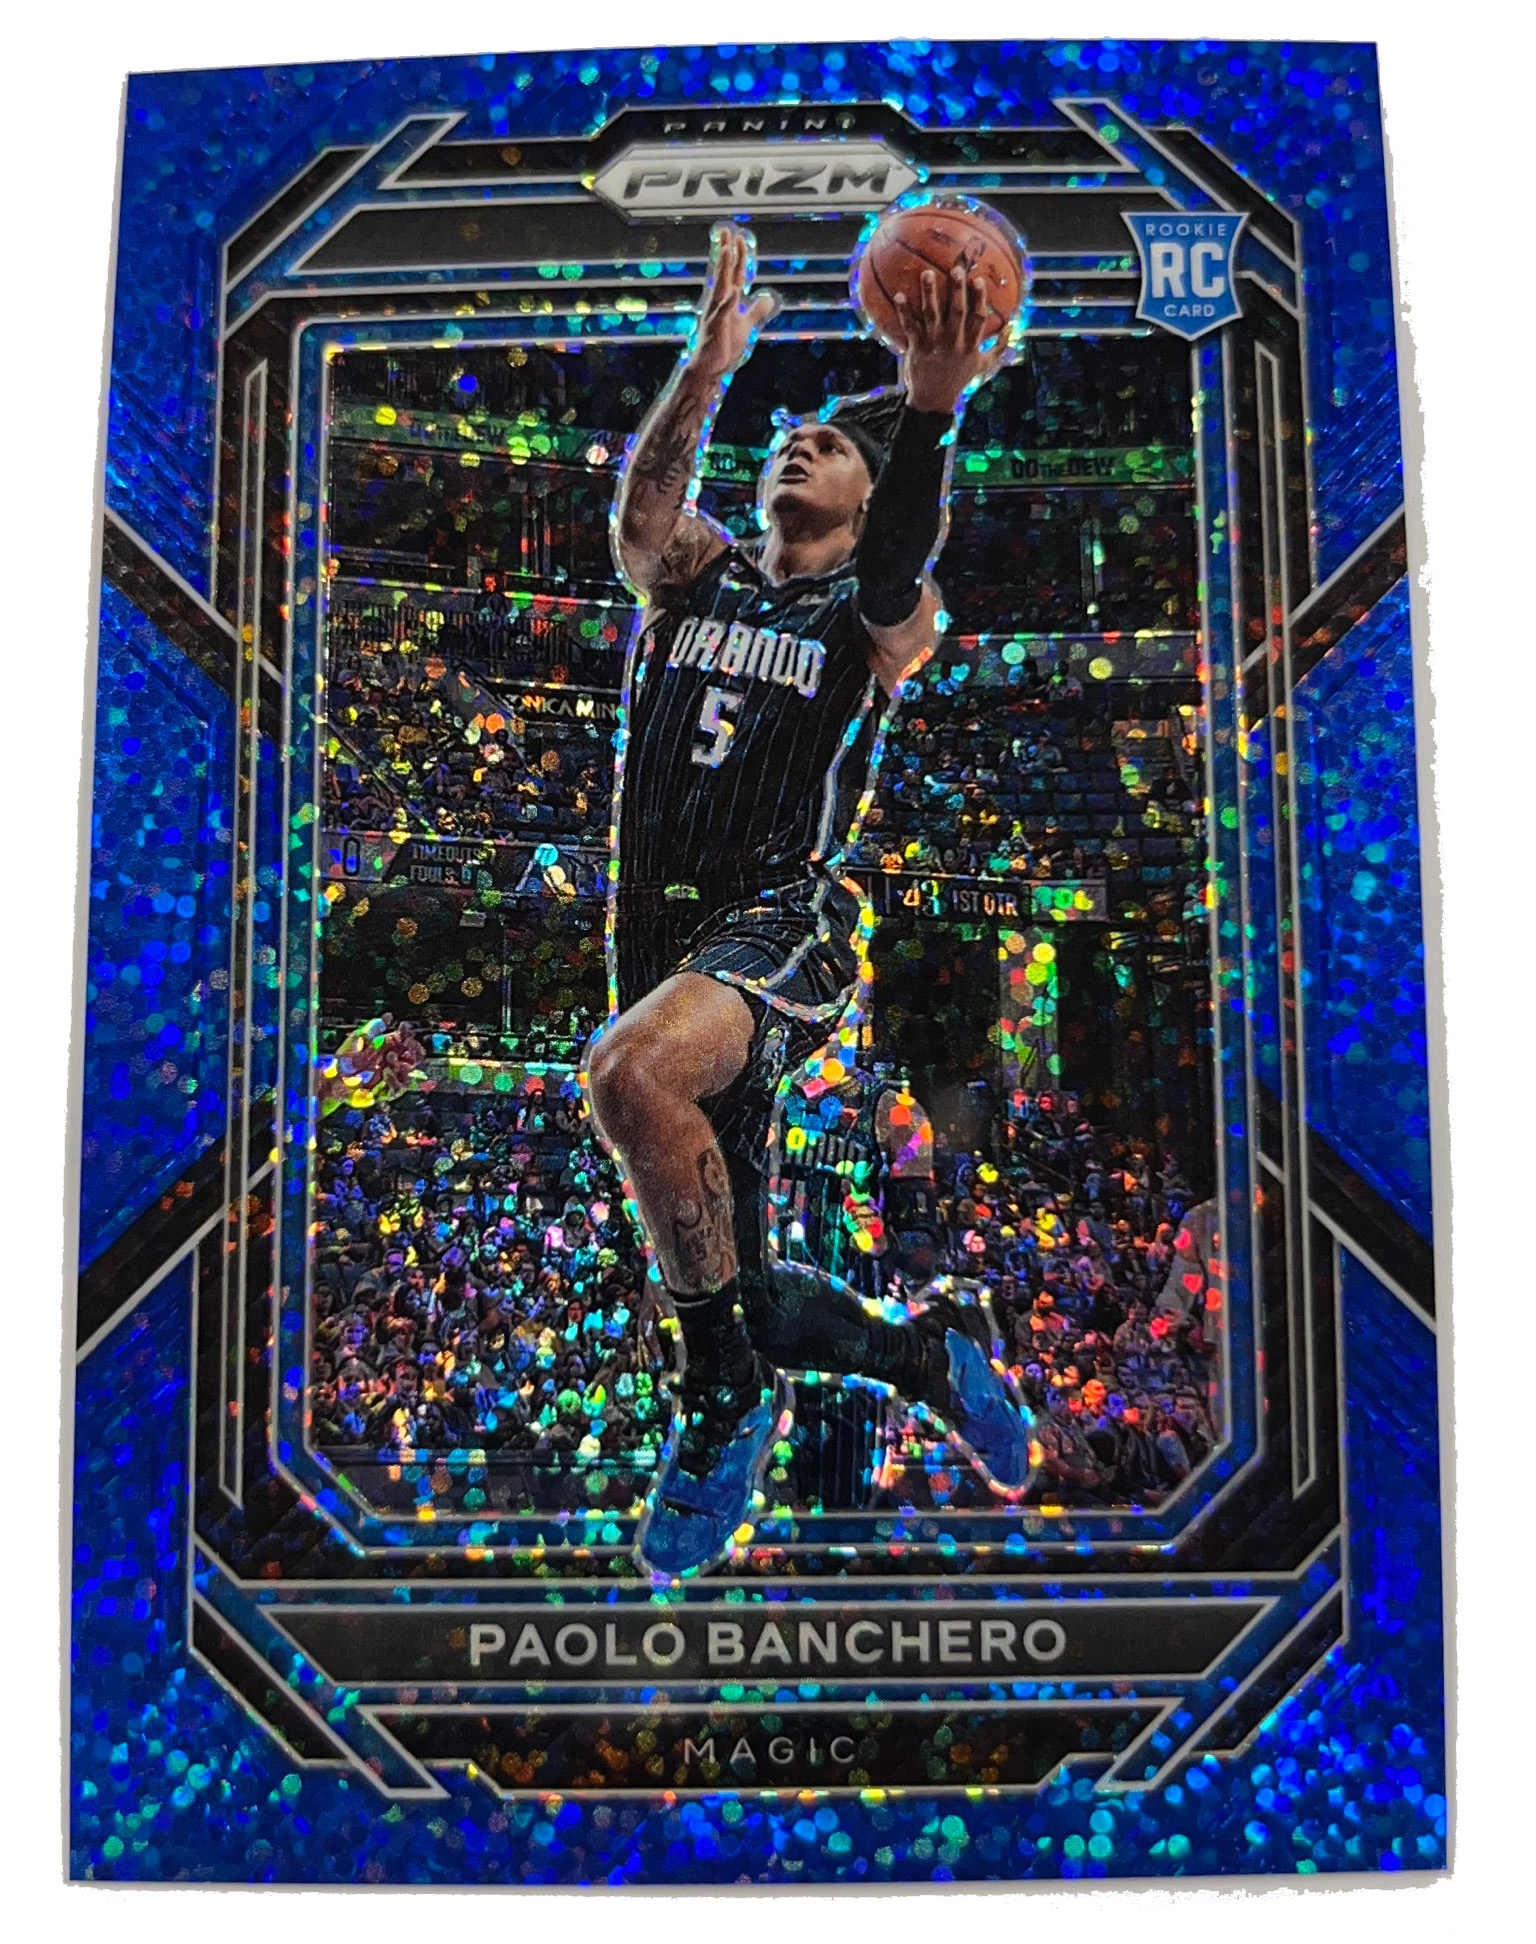 Update on 2022-23 Prizm NBA Redemption Sparkle Packs – The